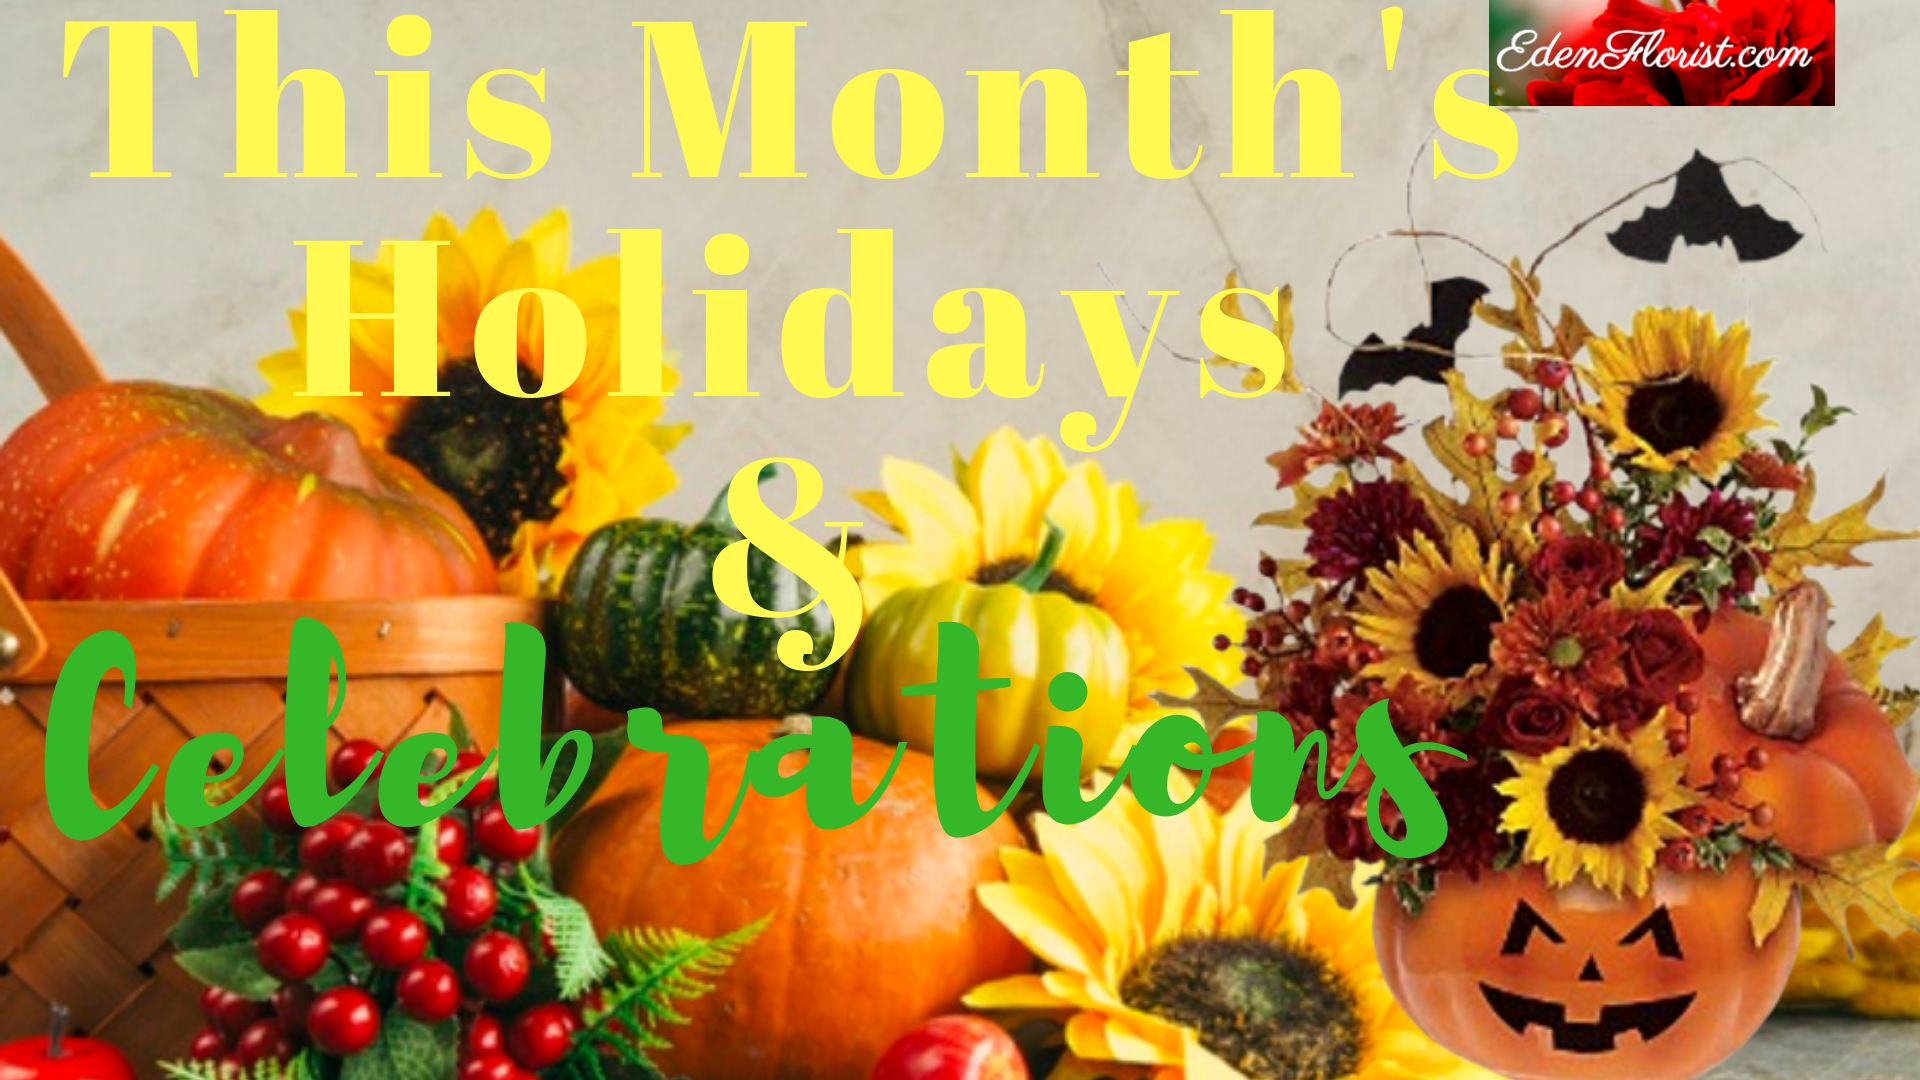 October Holidays, Events and Celebrations